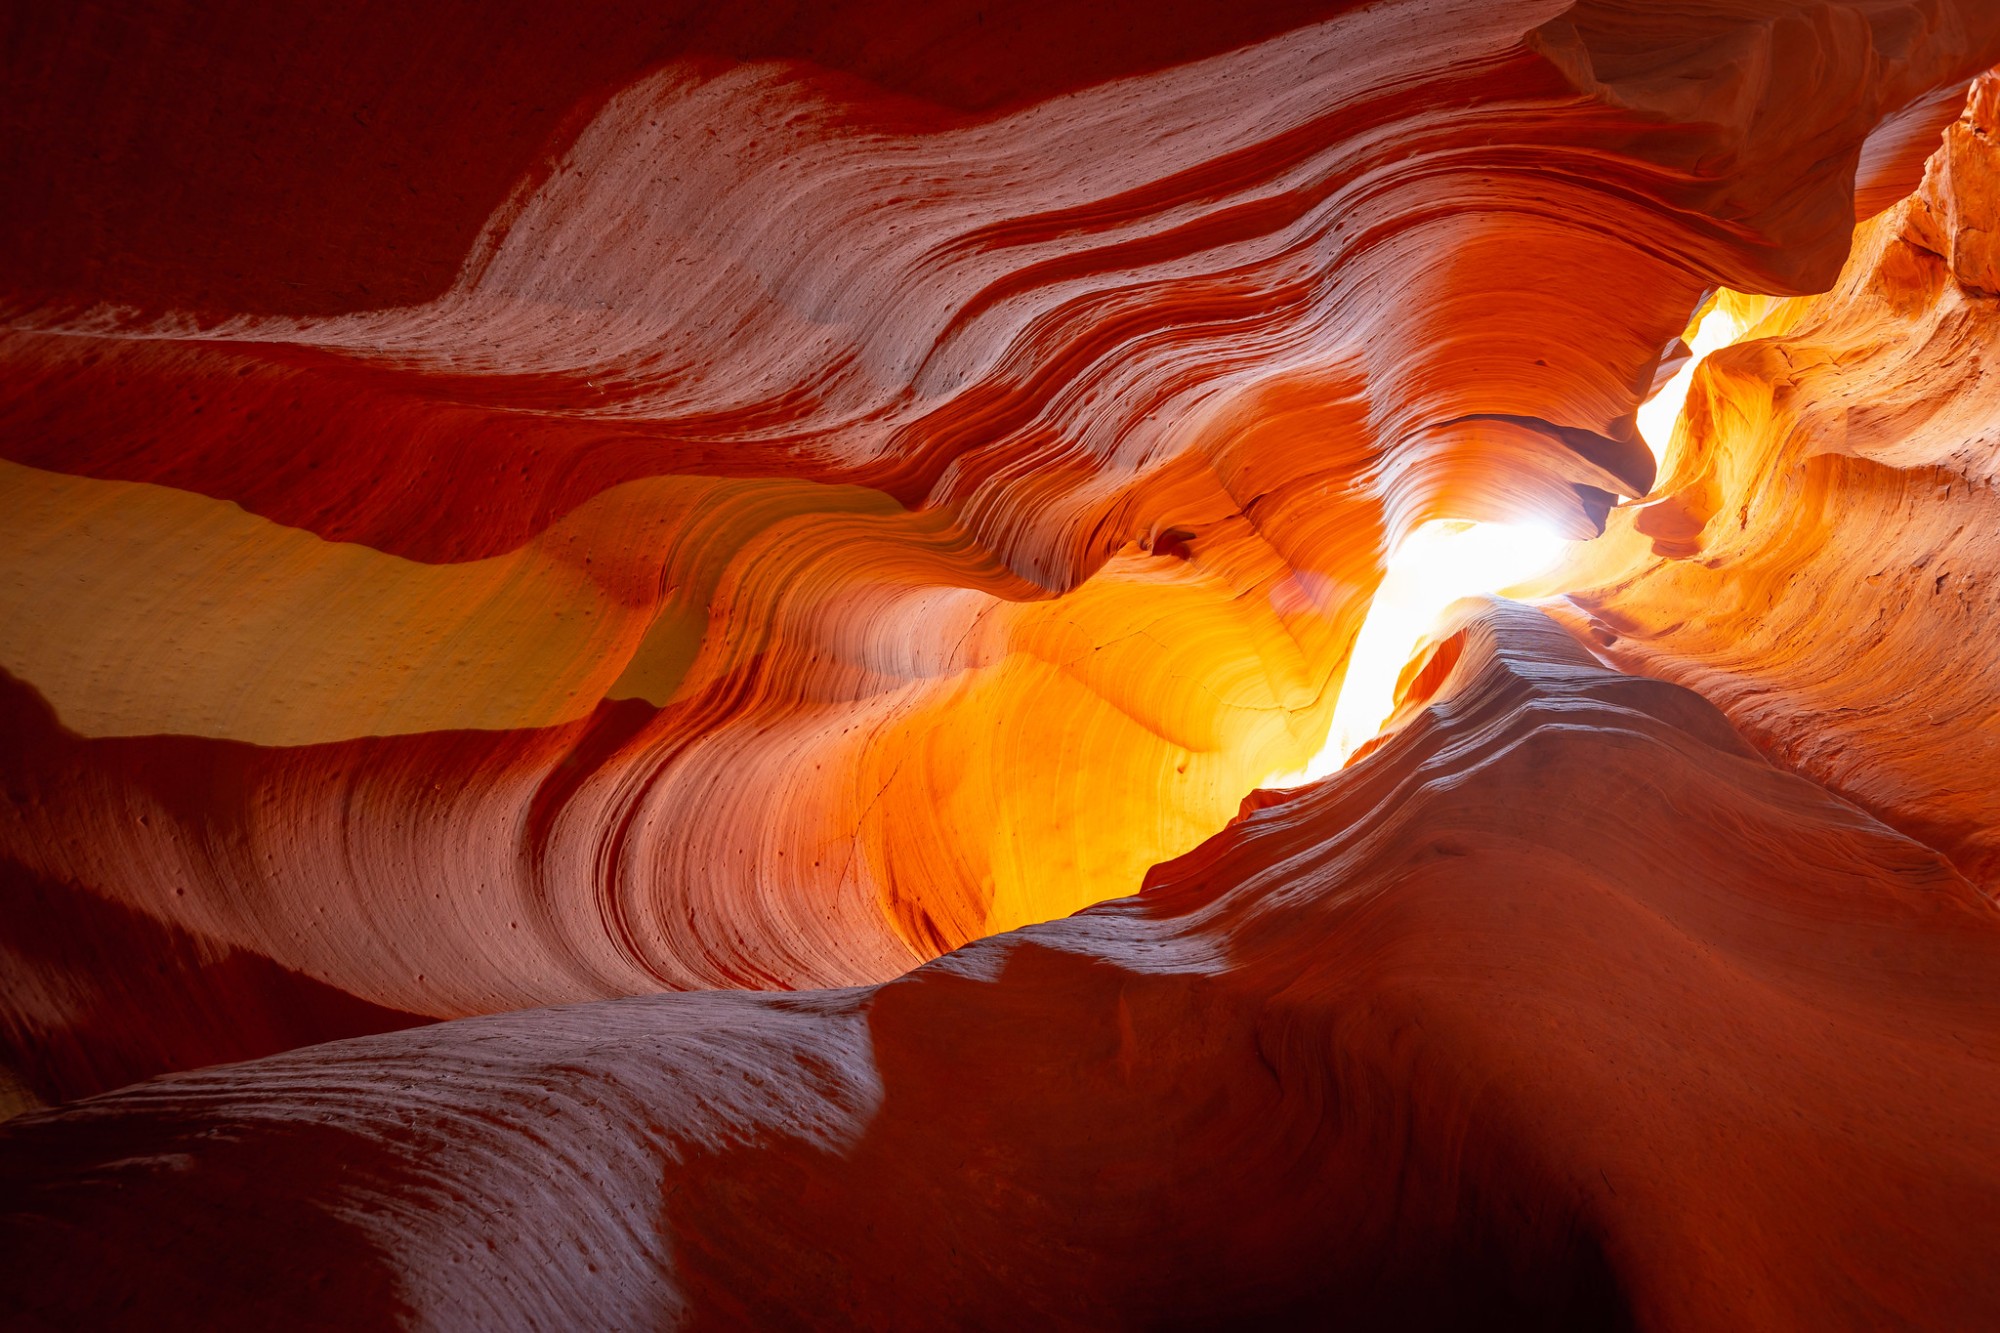 Antelope Canyon owes its creation to millions of years of erosion caused by flash floods and other natural processes. Rainwater, particularly during the monsoon season, rushes through the narrow passageways, gradually carving out the intricate shapes and contours that define the canyon's interior. Over time, these passageways have deepened and smoothed, resulting in the iconic "flowing" formations that characterize the canyon today.